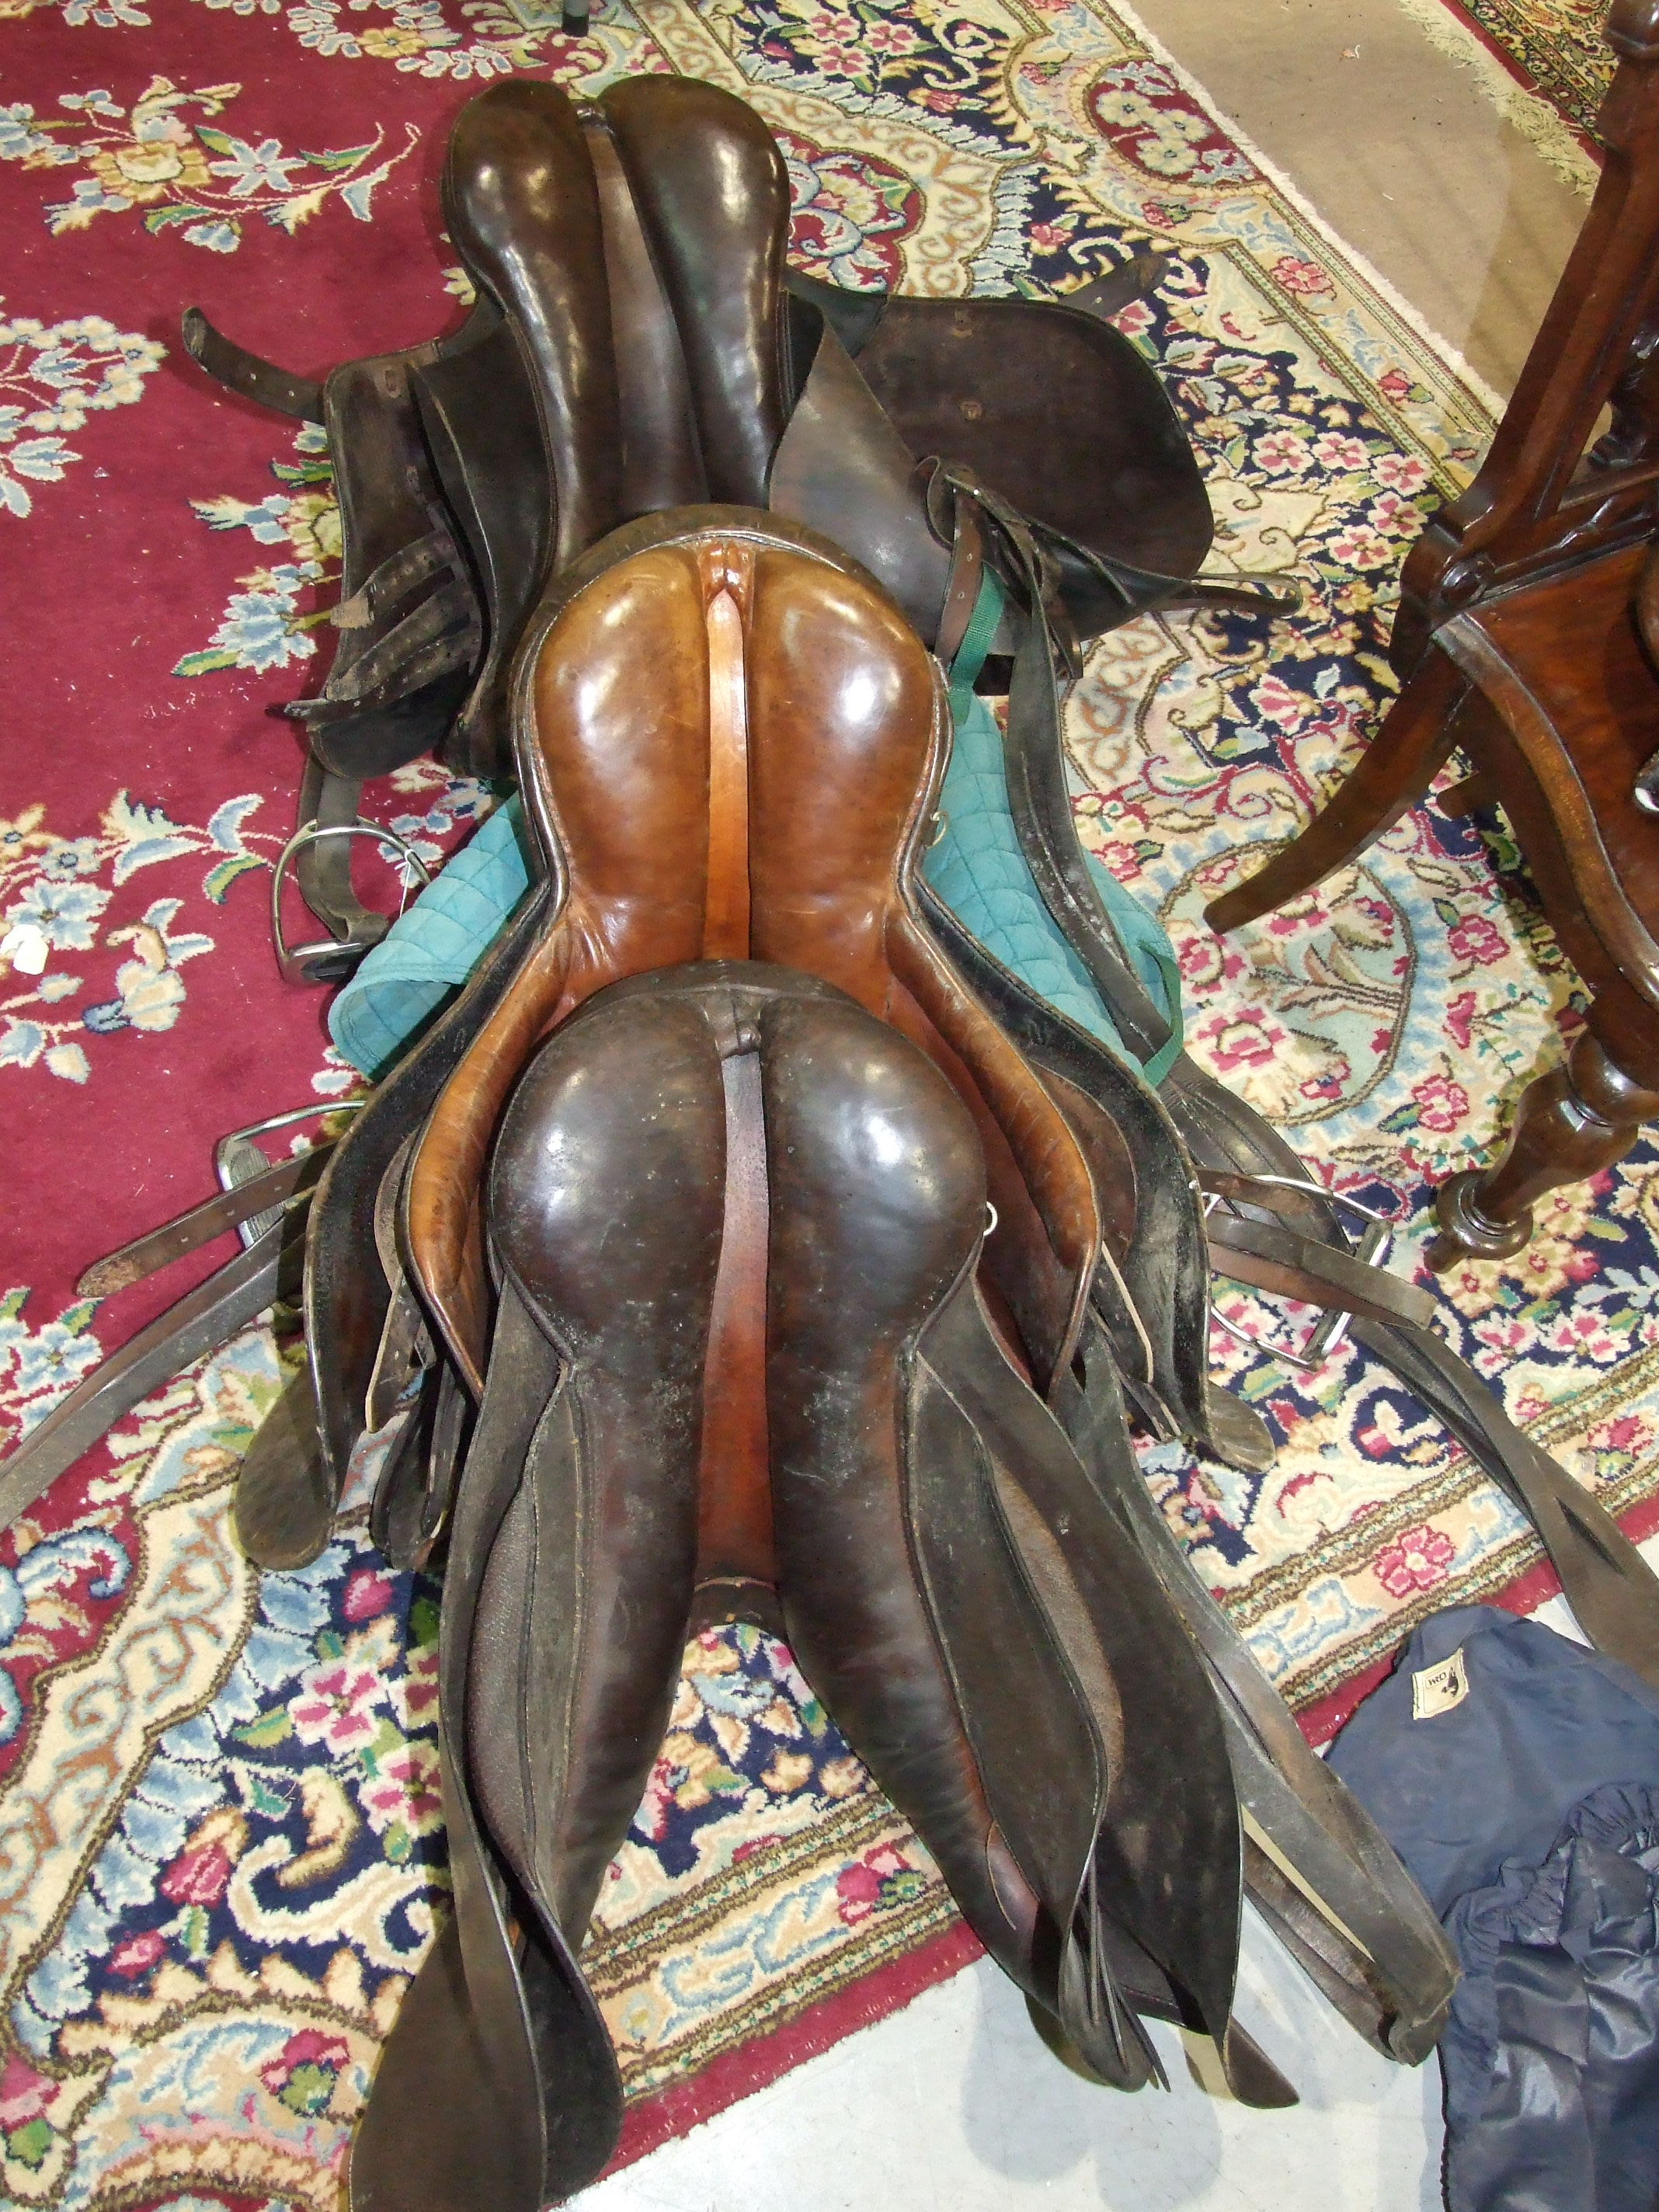 Three leather saddles, miscellaneous bridles and a metal saddle stand. - Image 2 of 4